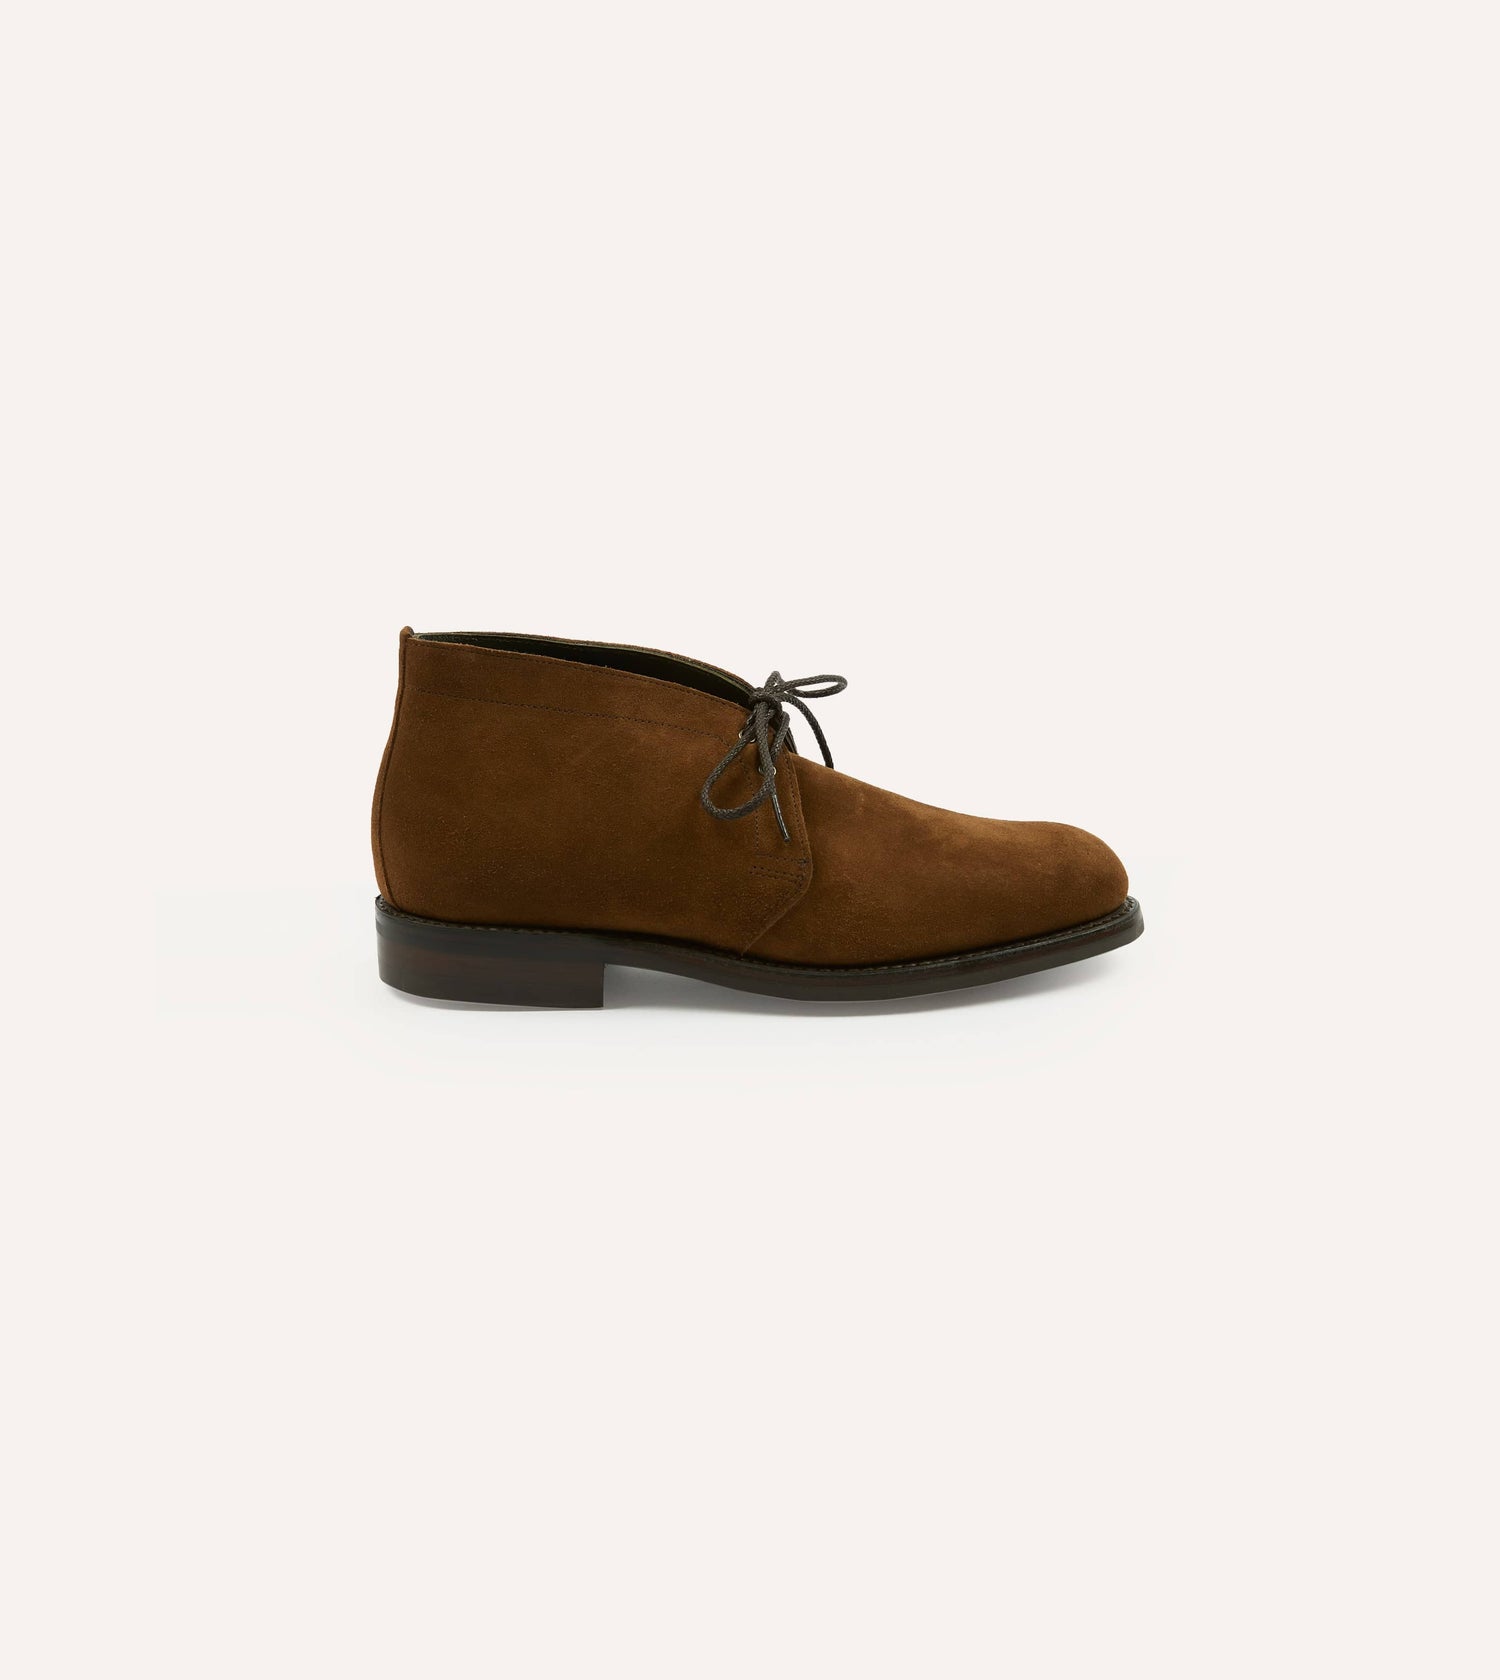 Snuff Suede Murphy Goodyear Welted Chukka Boot